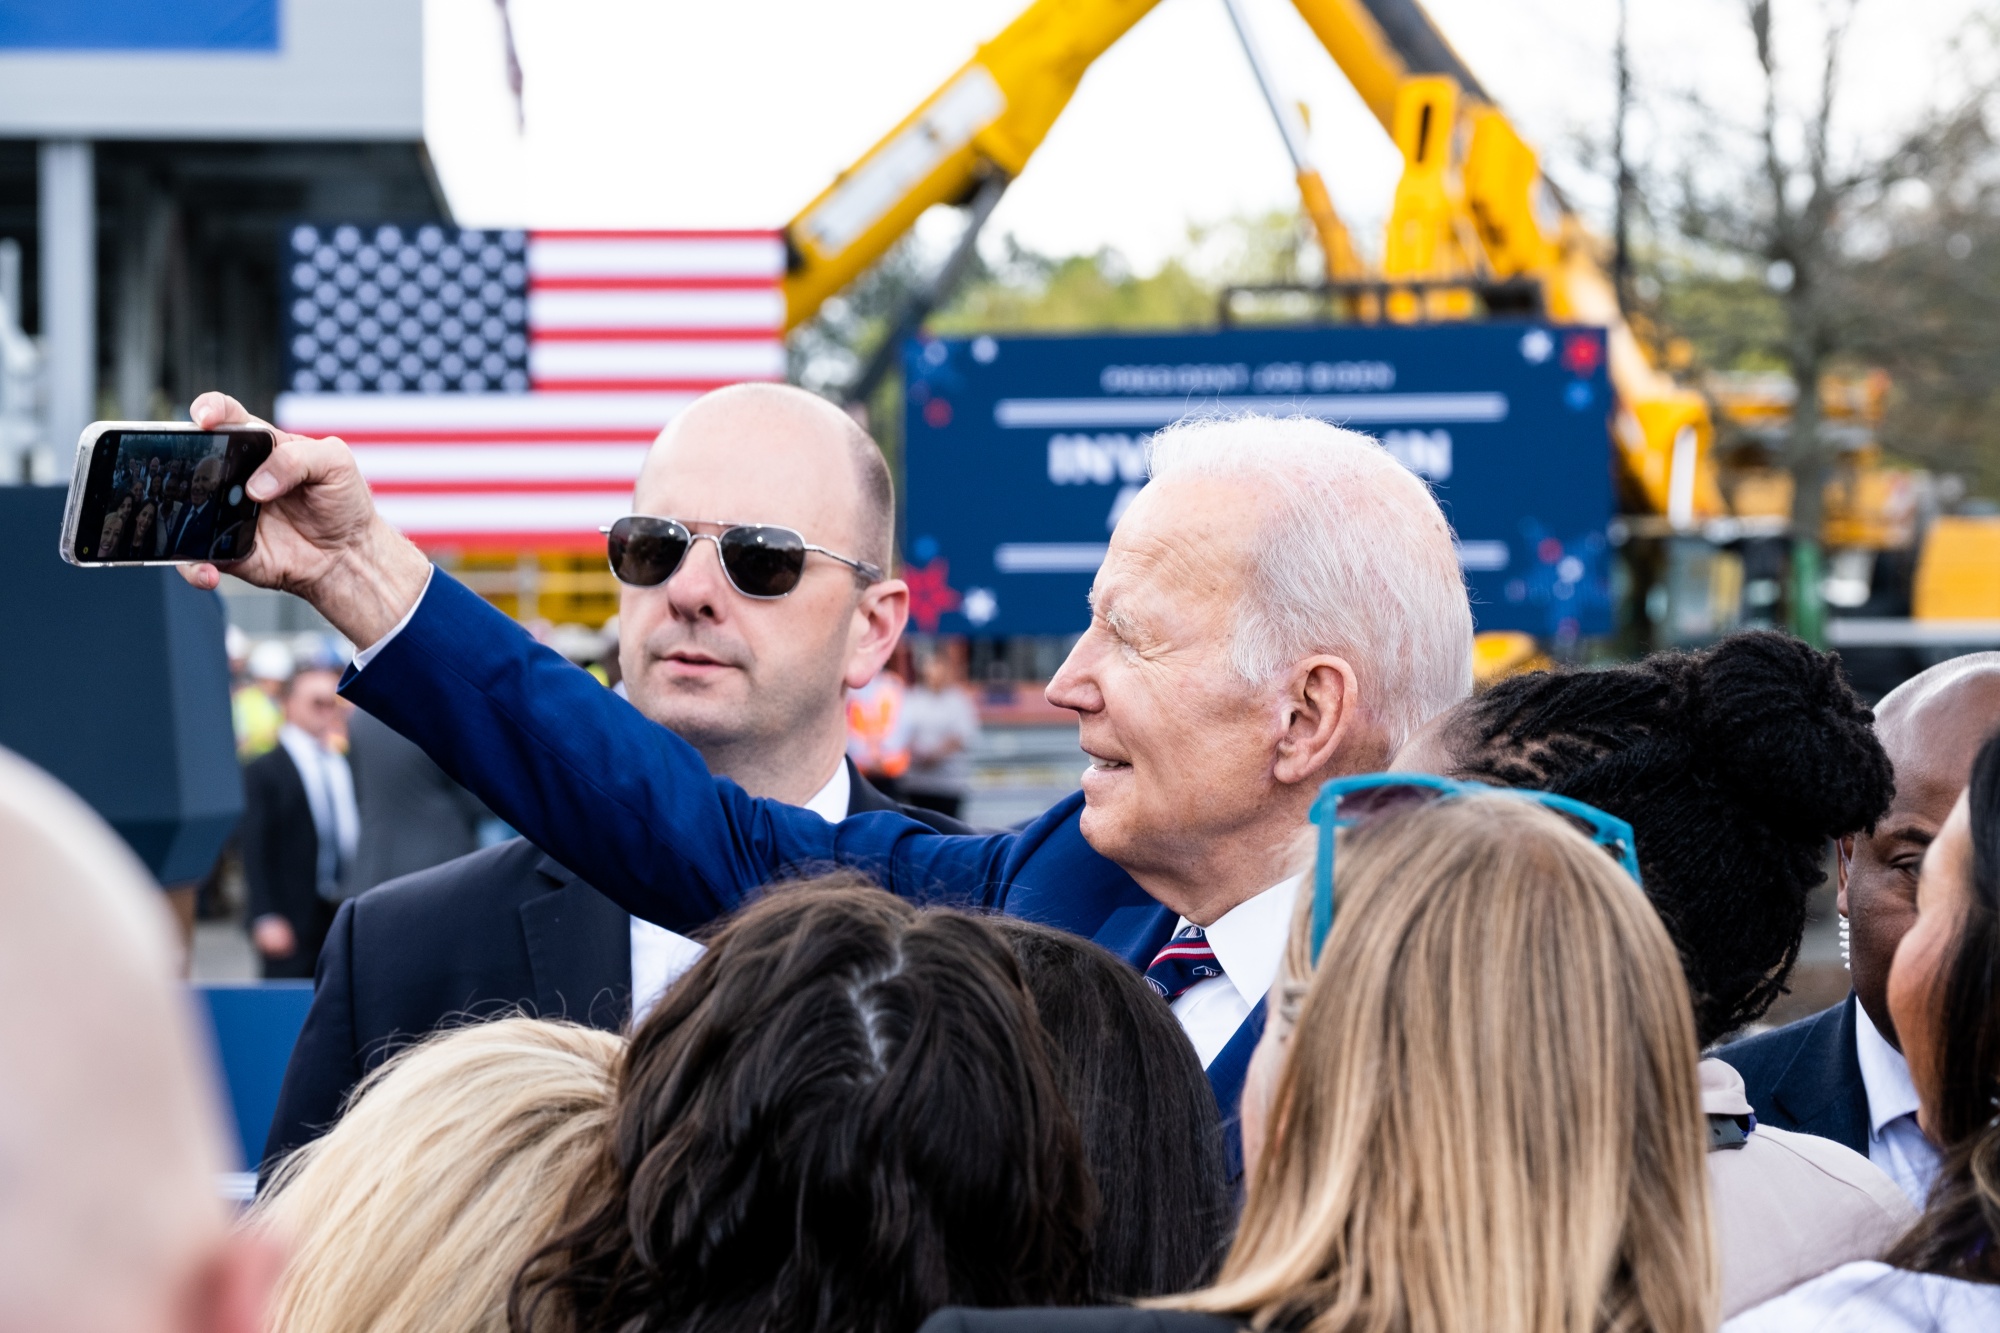 US President Joe Biden poses for selfie photographs with attendees at Wolfspeed Inc. in Durham, North Carolina, US, on Tuesday, March 28, 2023. Wolfspeed, a manufacturer of semiconductors and chip components, has announced a $5 billion investment that will create 1,800 new jobs, according to a White House official.